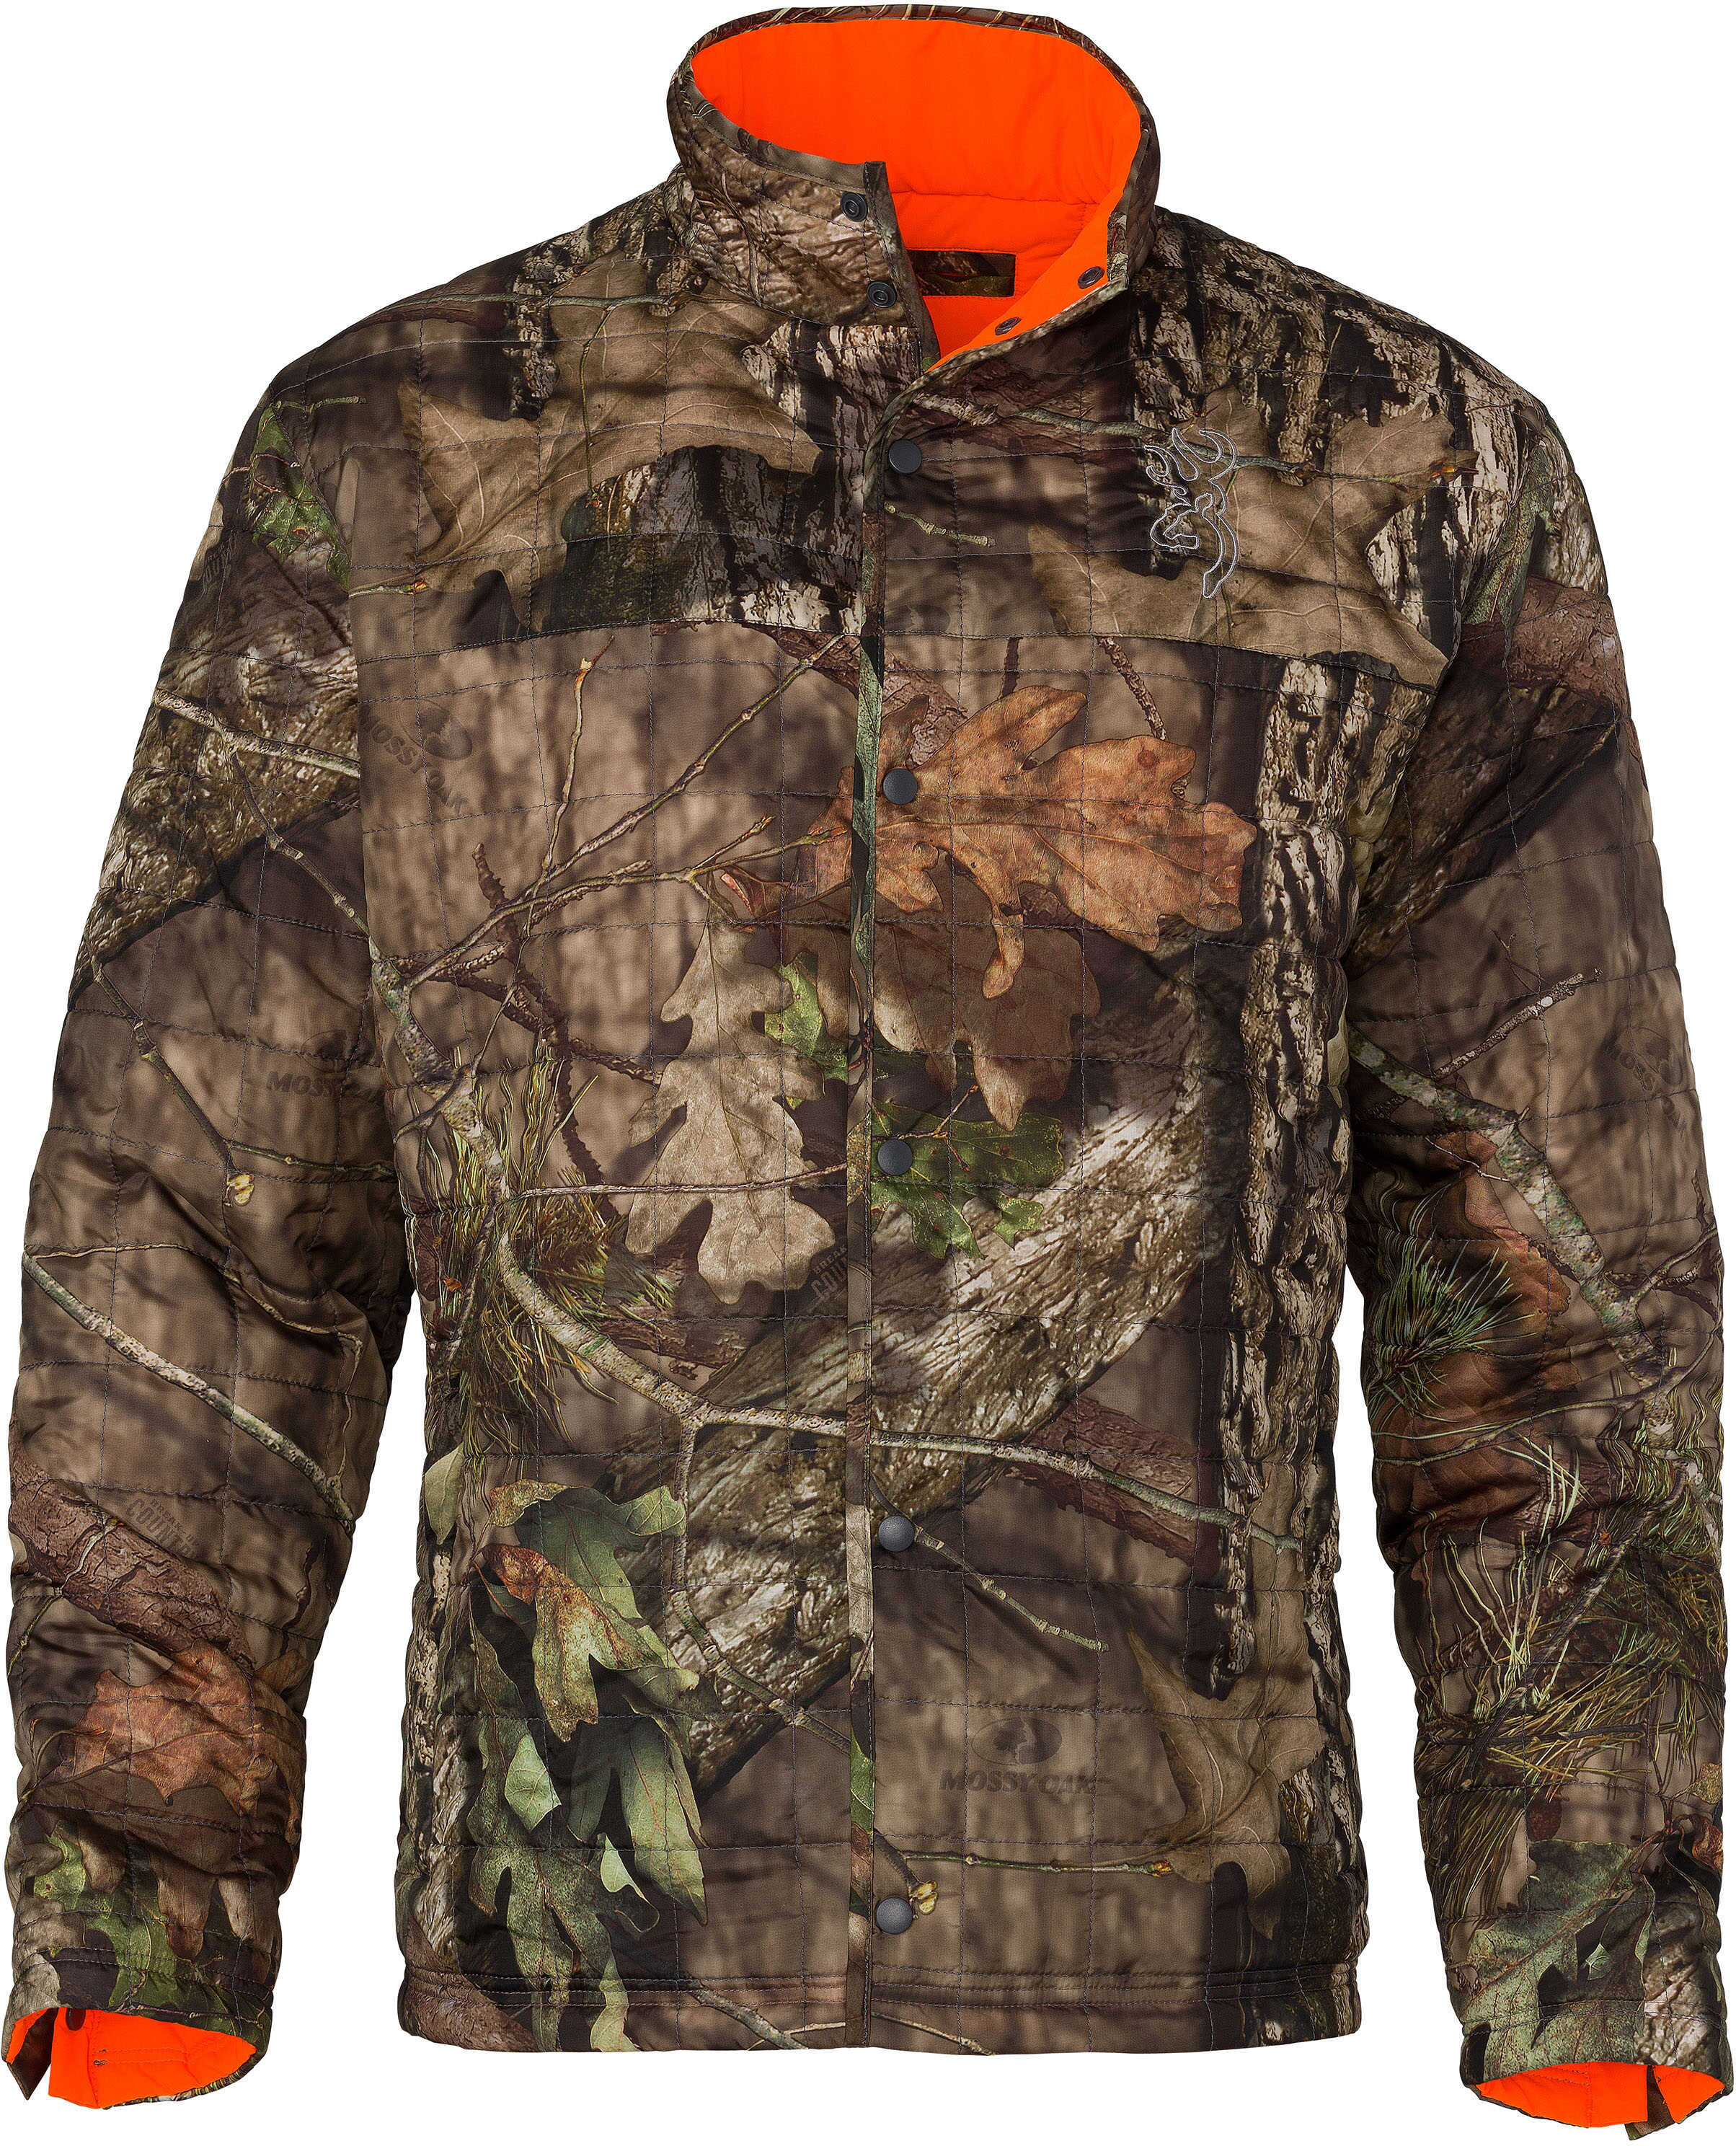 Browning Quick Change-WD Insulated Jacket Mossy Oak Break-Up Country/Blaze, Medium